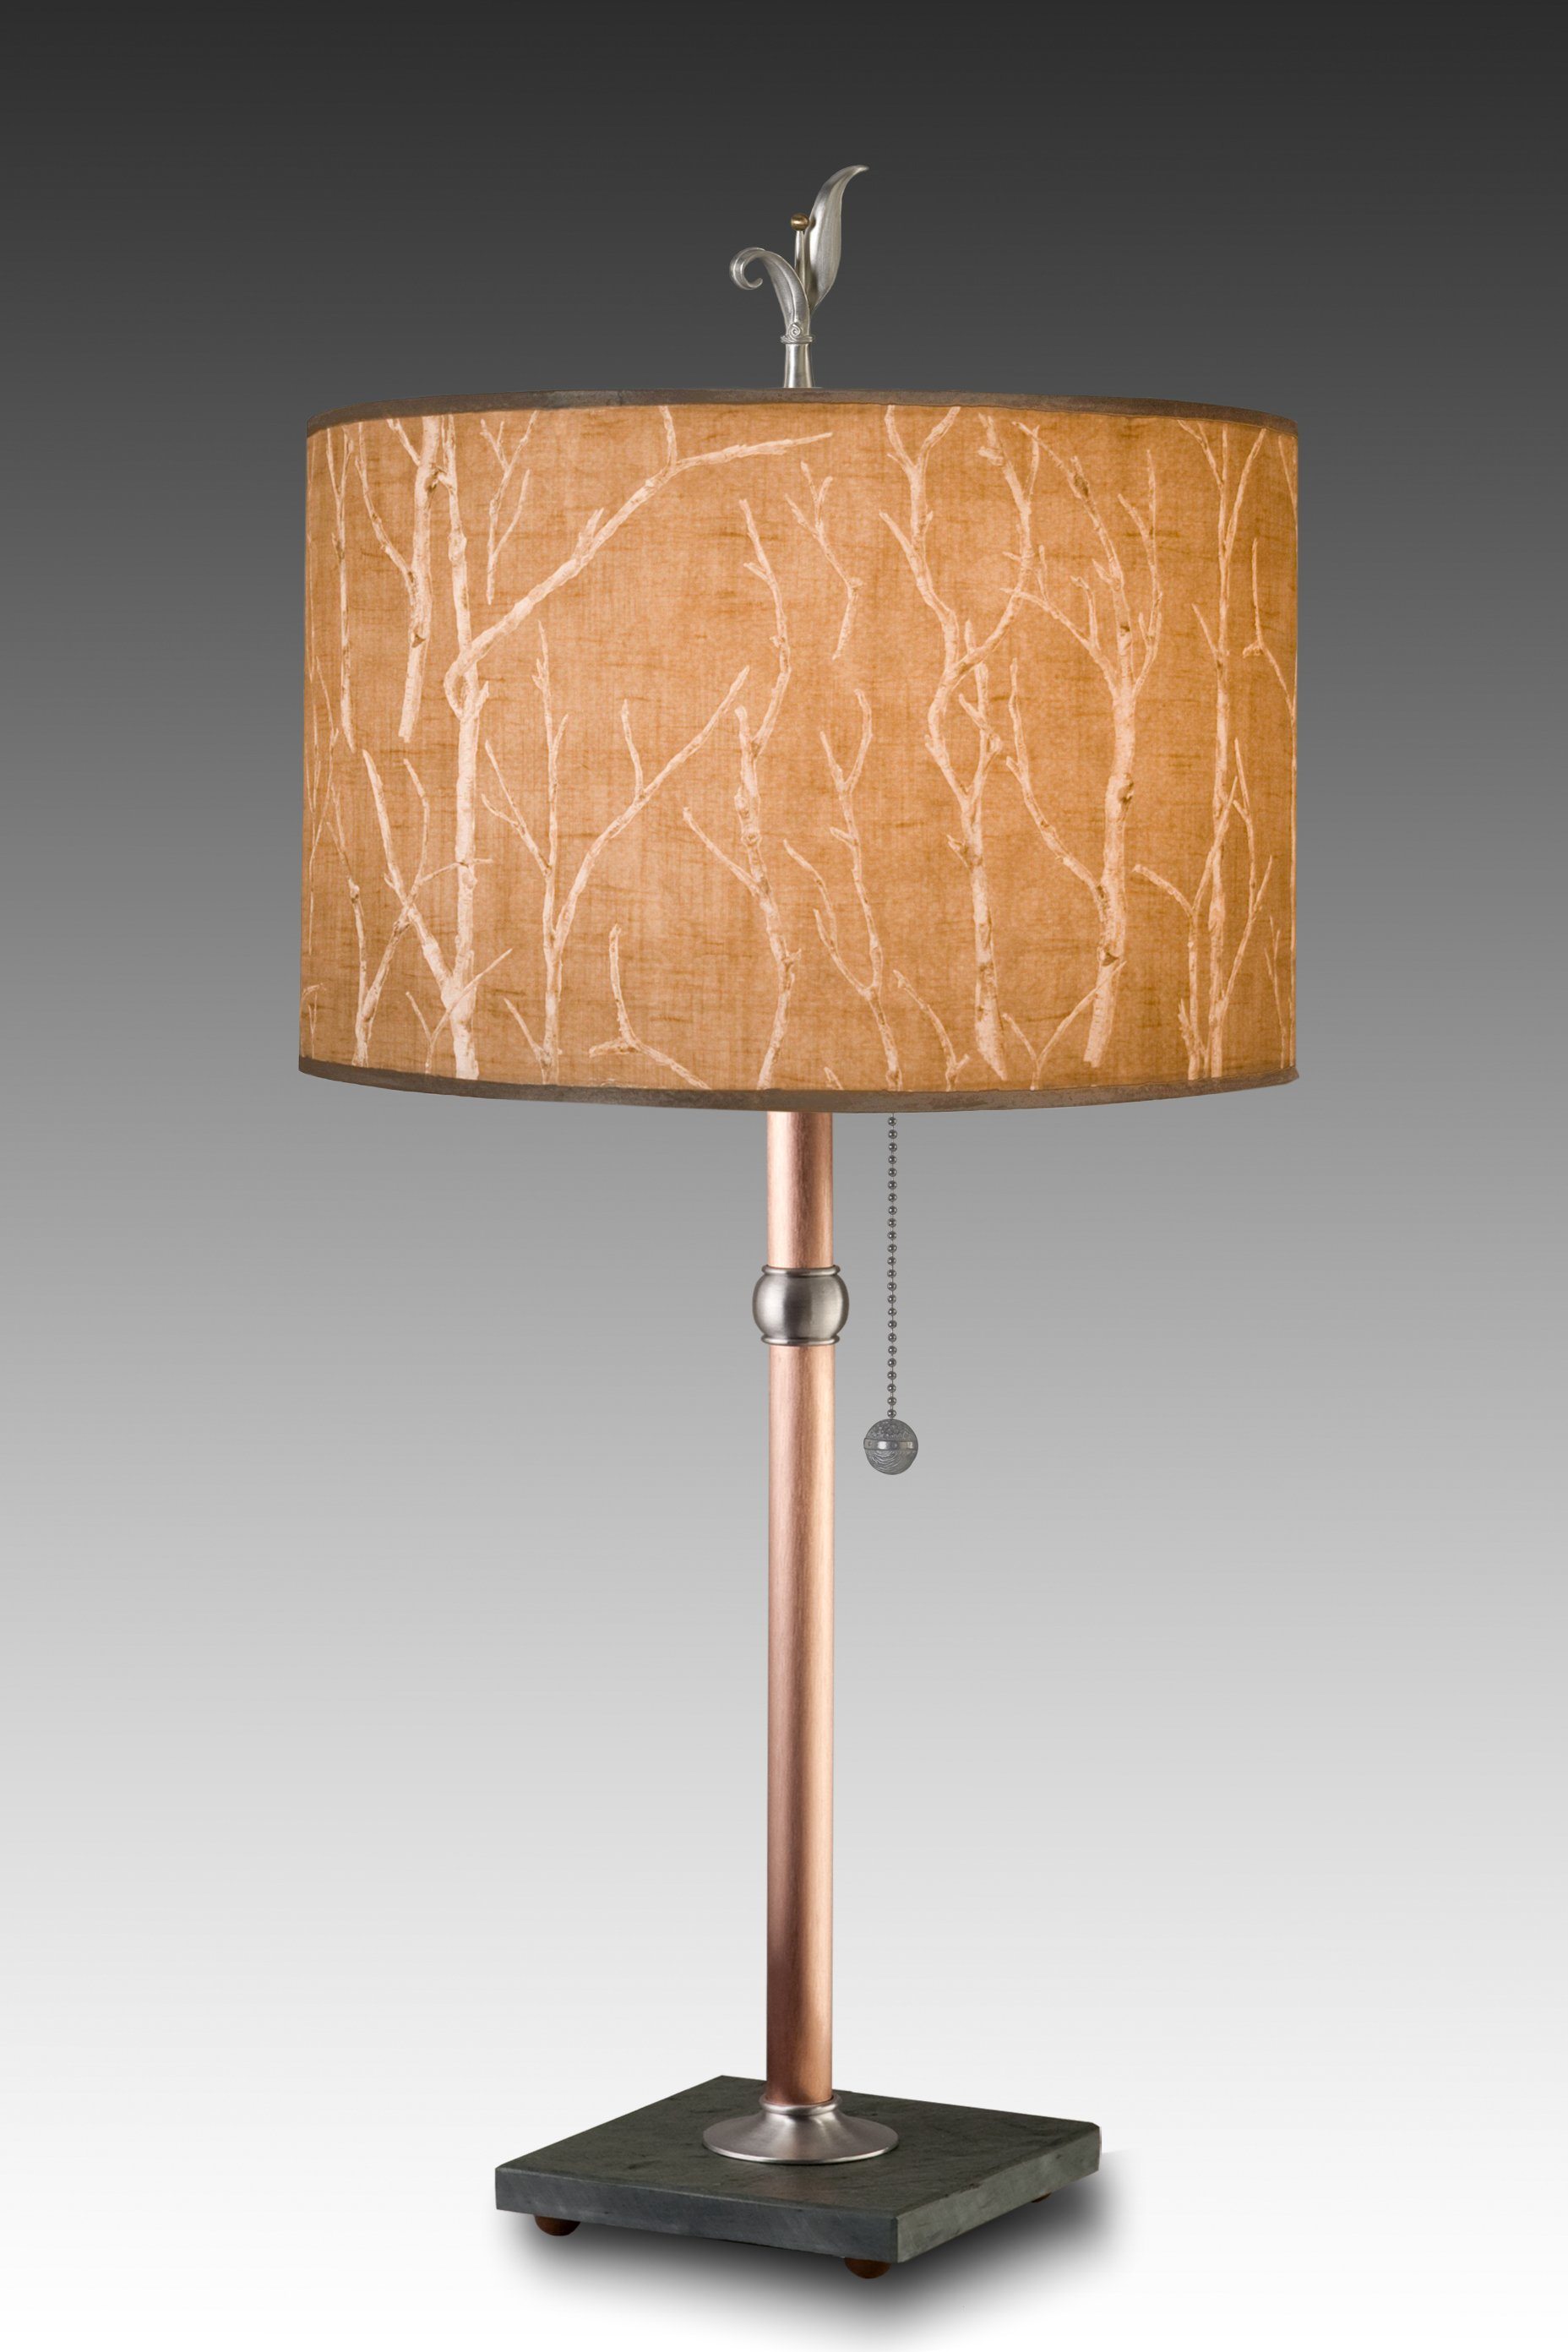 Janna Ugone & Co Table Lamps Copper Table Lamp with Large Drum Shade in Twigs